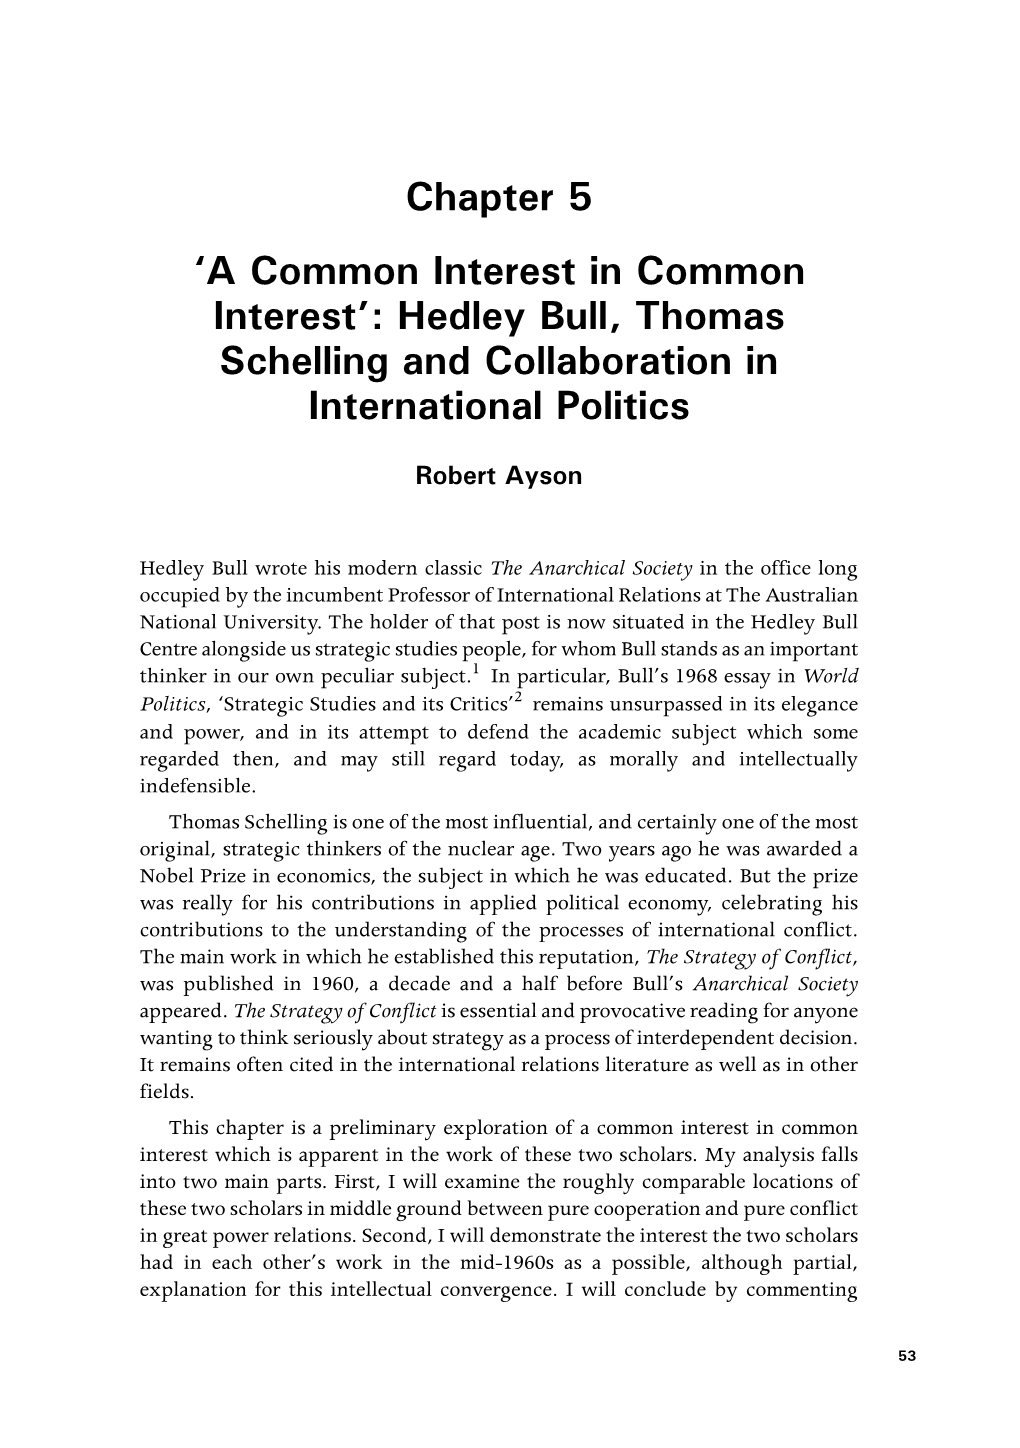 Hedley Bull, Thomas Schelling and Collaboration in International Politics